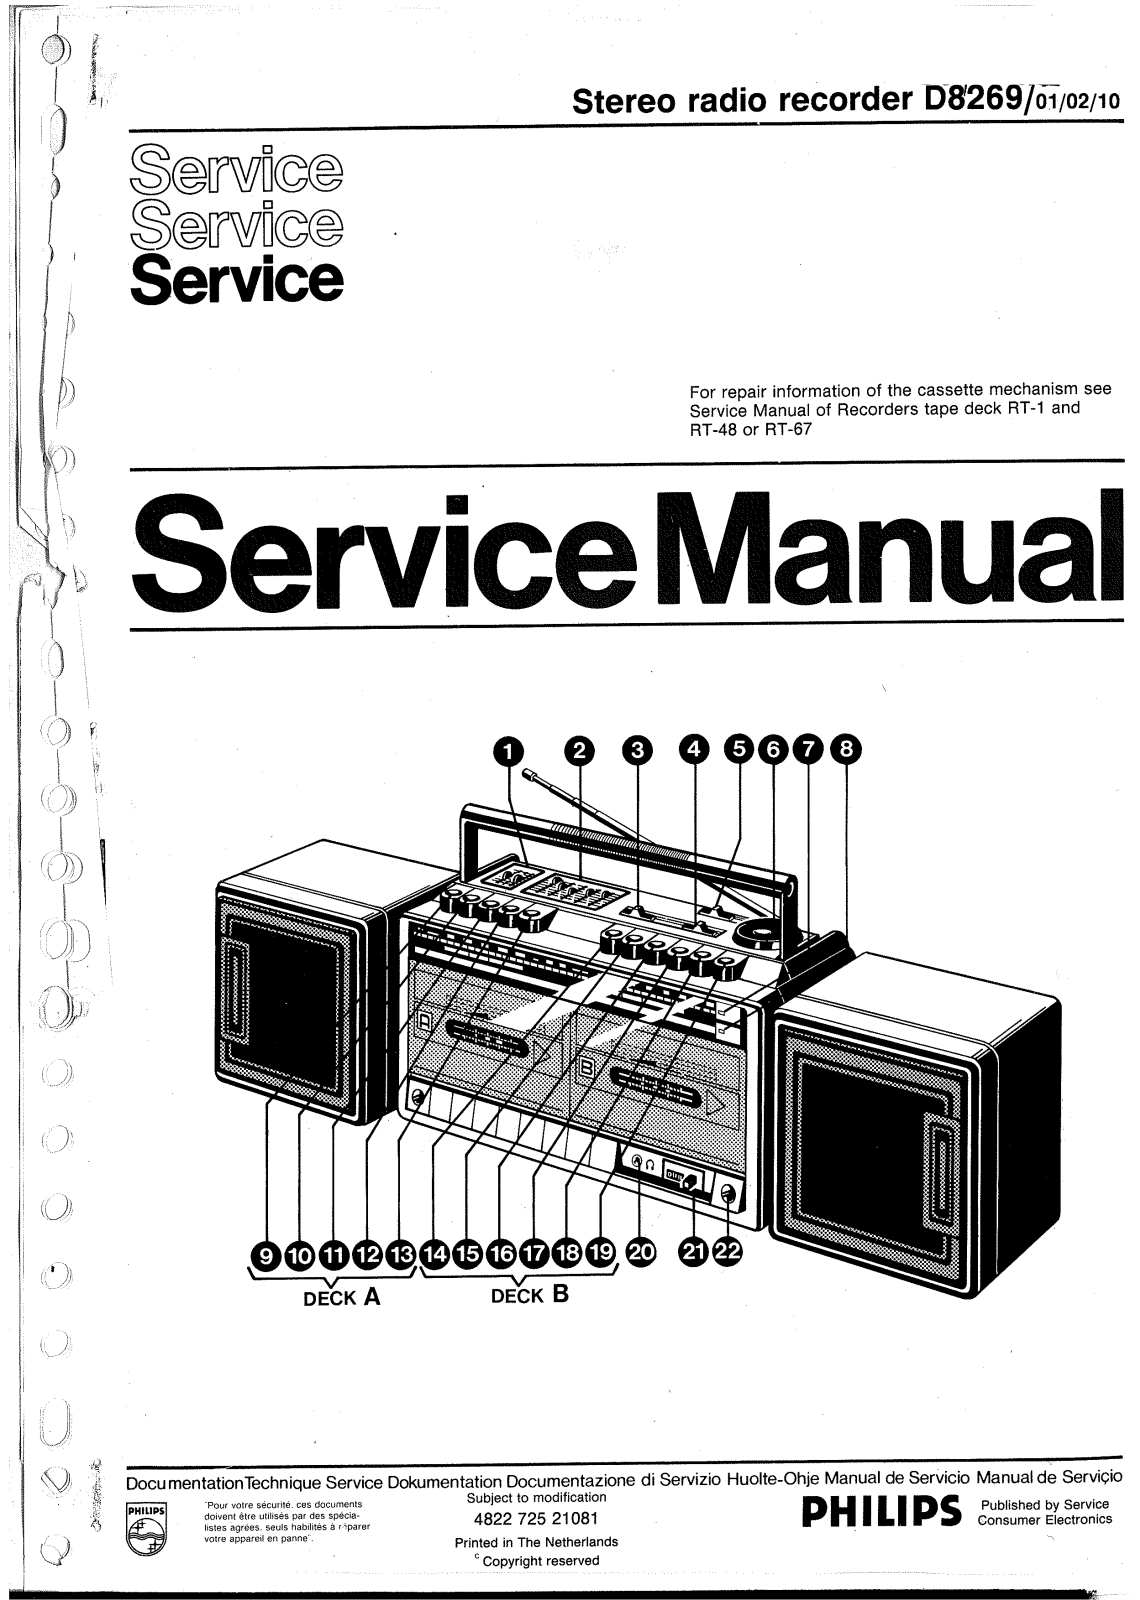 Philips D-8269 Service Manual